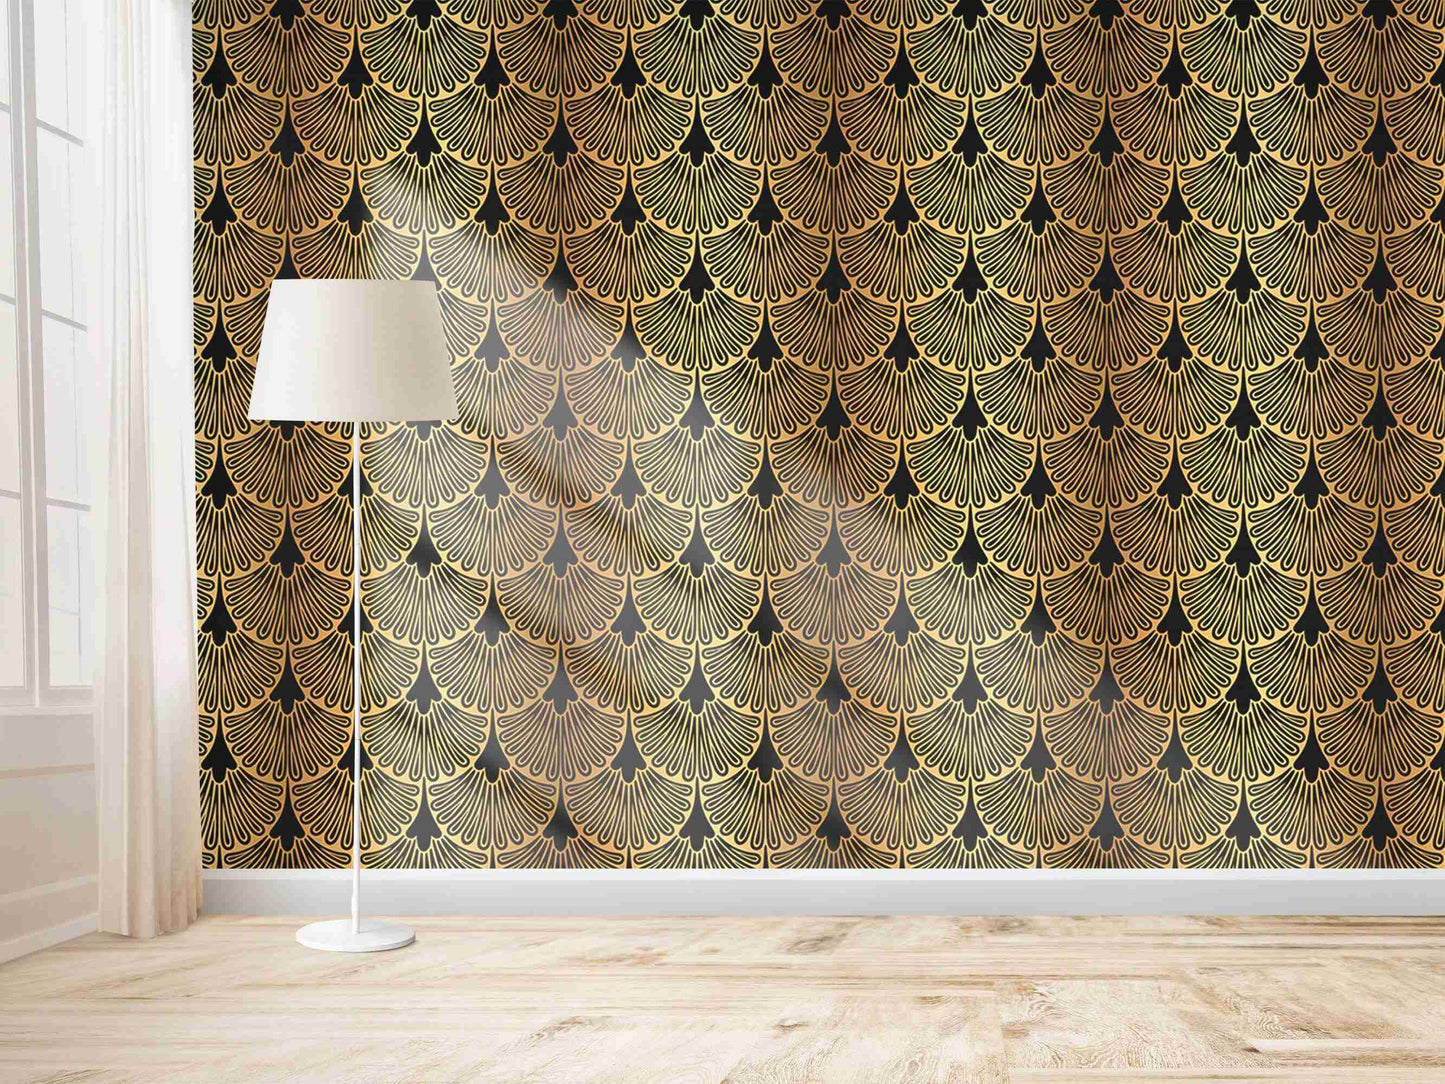 Elegant wall mural with a captivating pattern, creating a sophisticated ambiance.